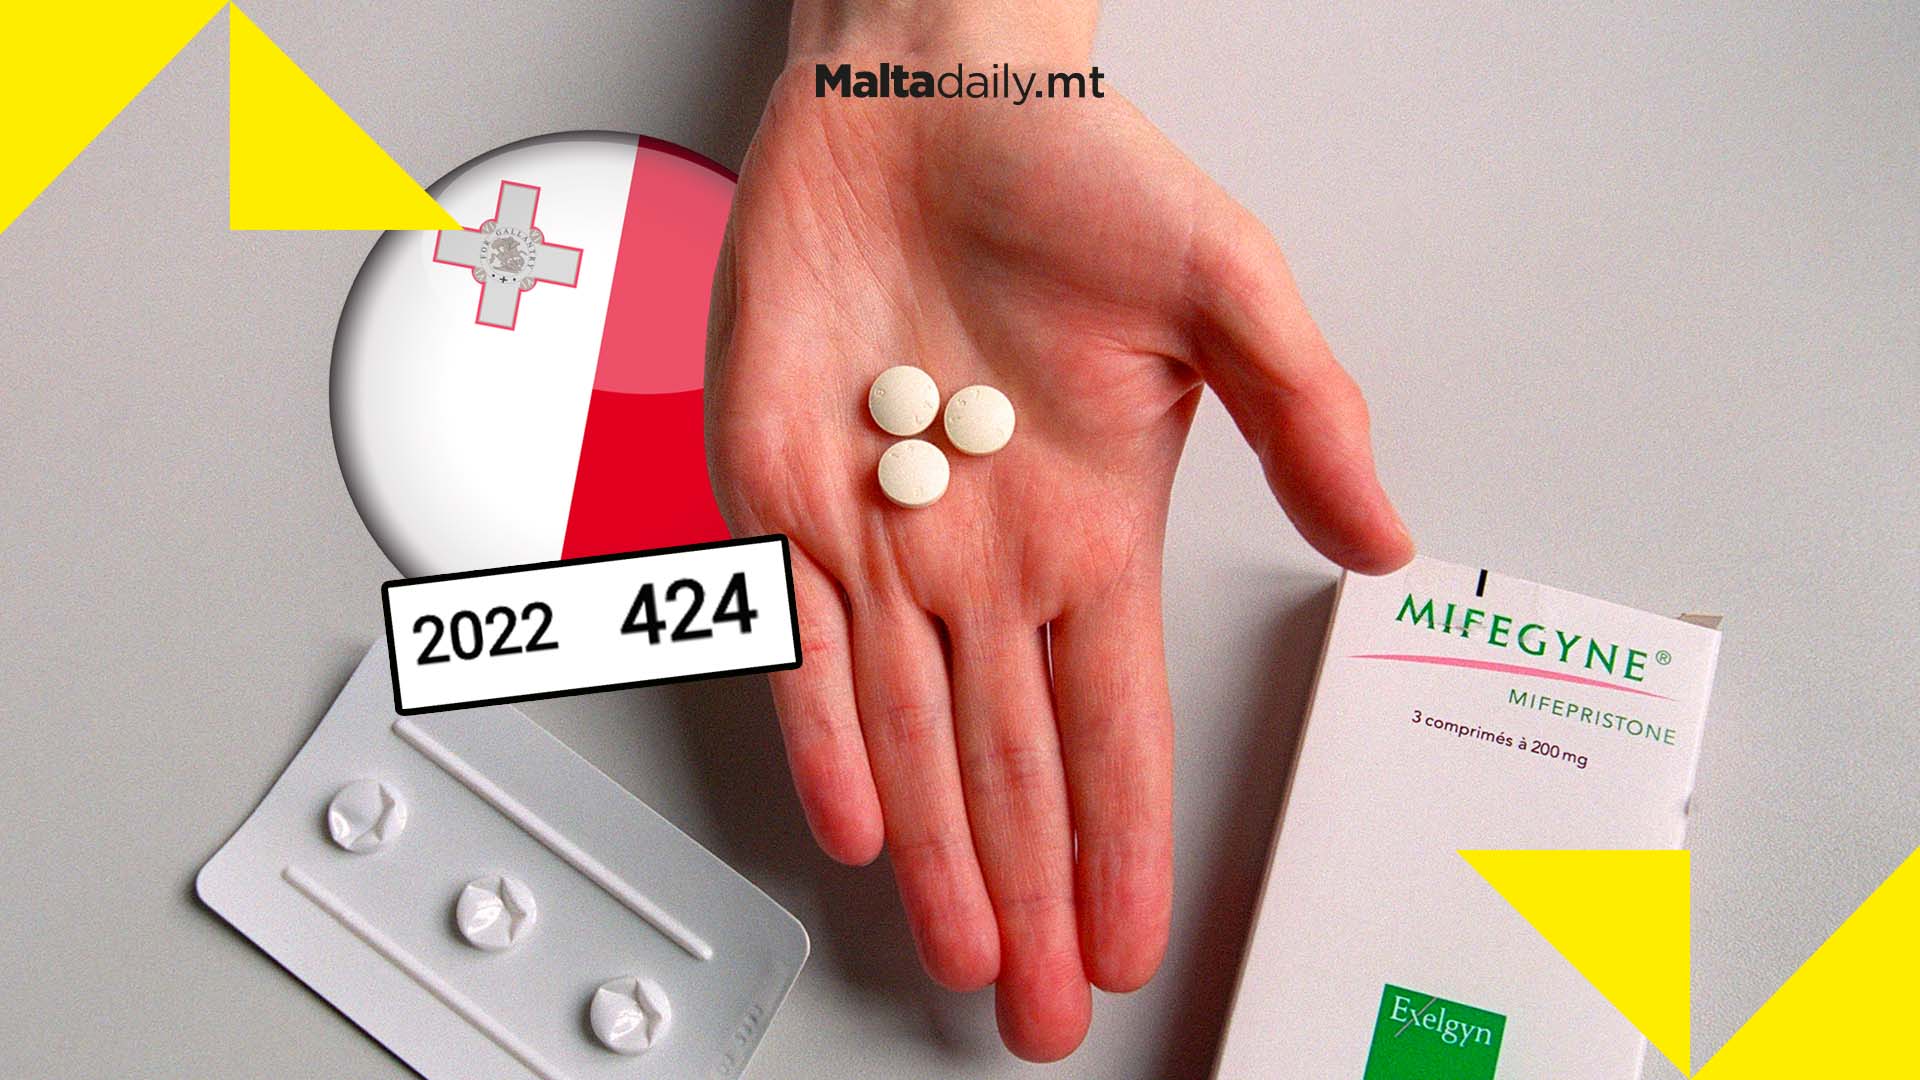 Record number of abortion pill kits sent to Malta in 2022